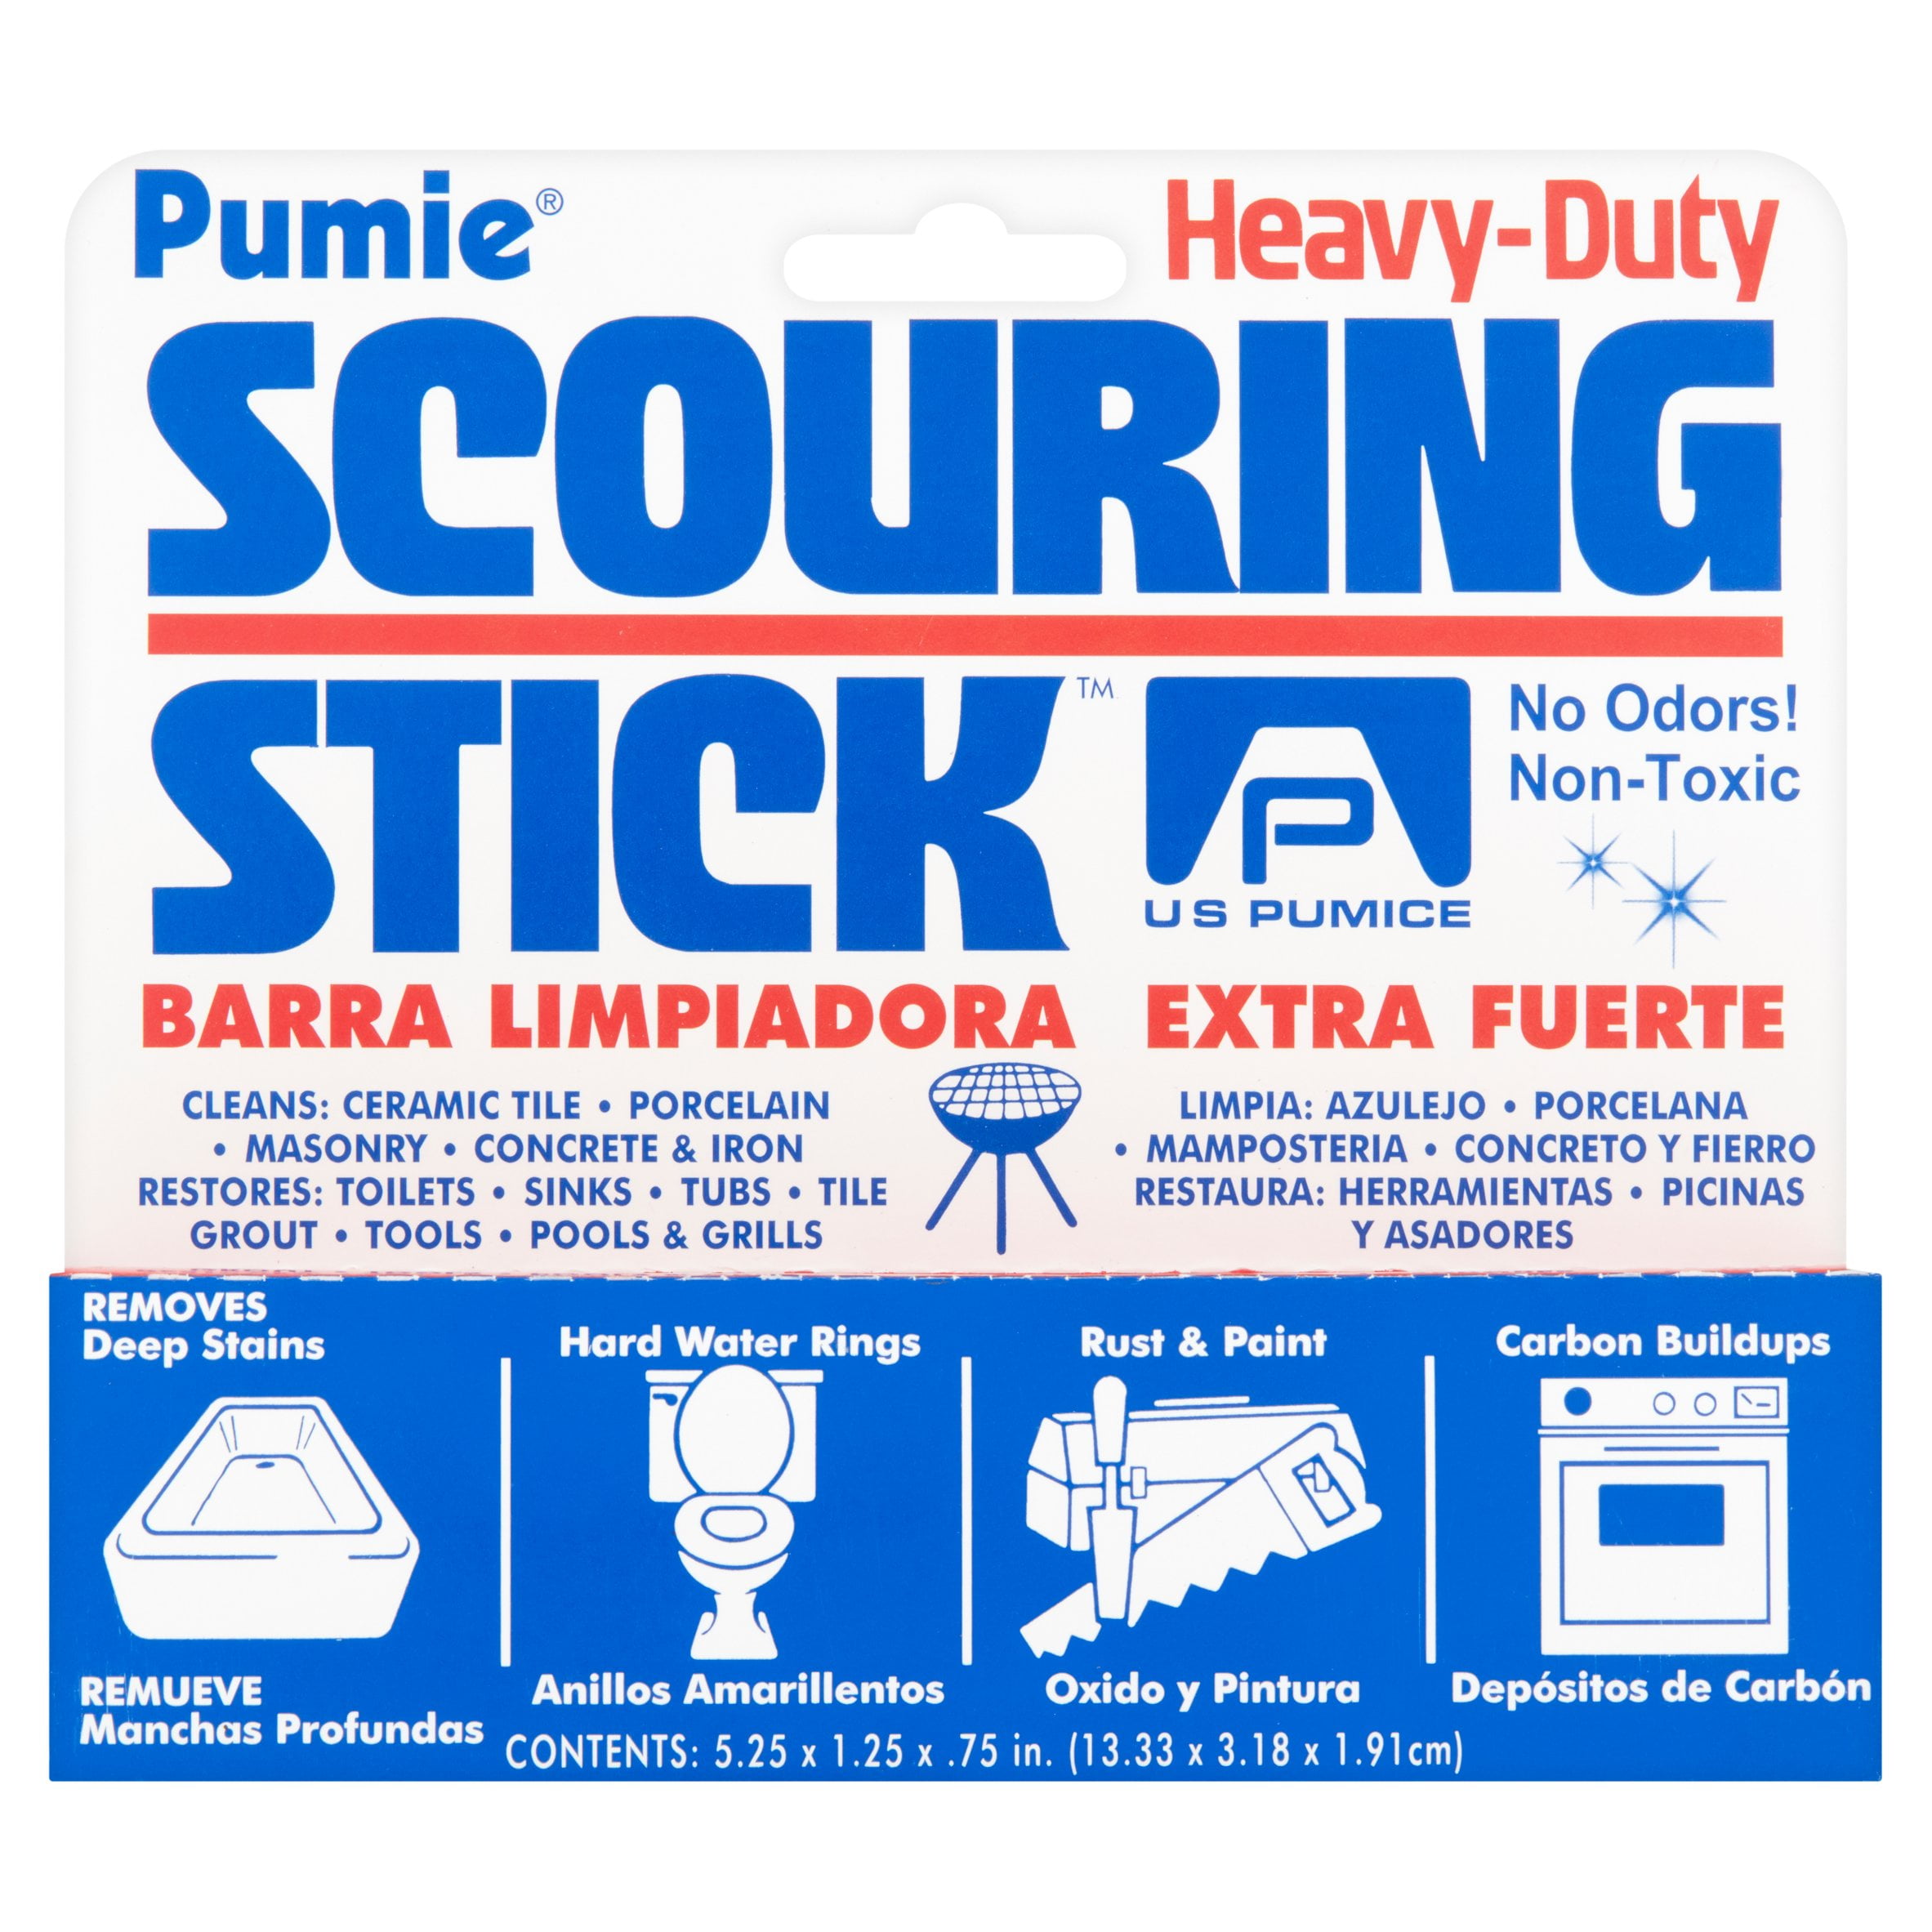 Pumie Scouring Stick, non toxic, removes hard stains, hand held.